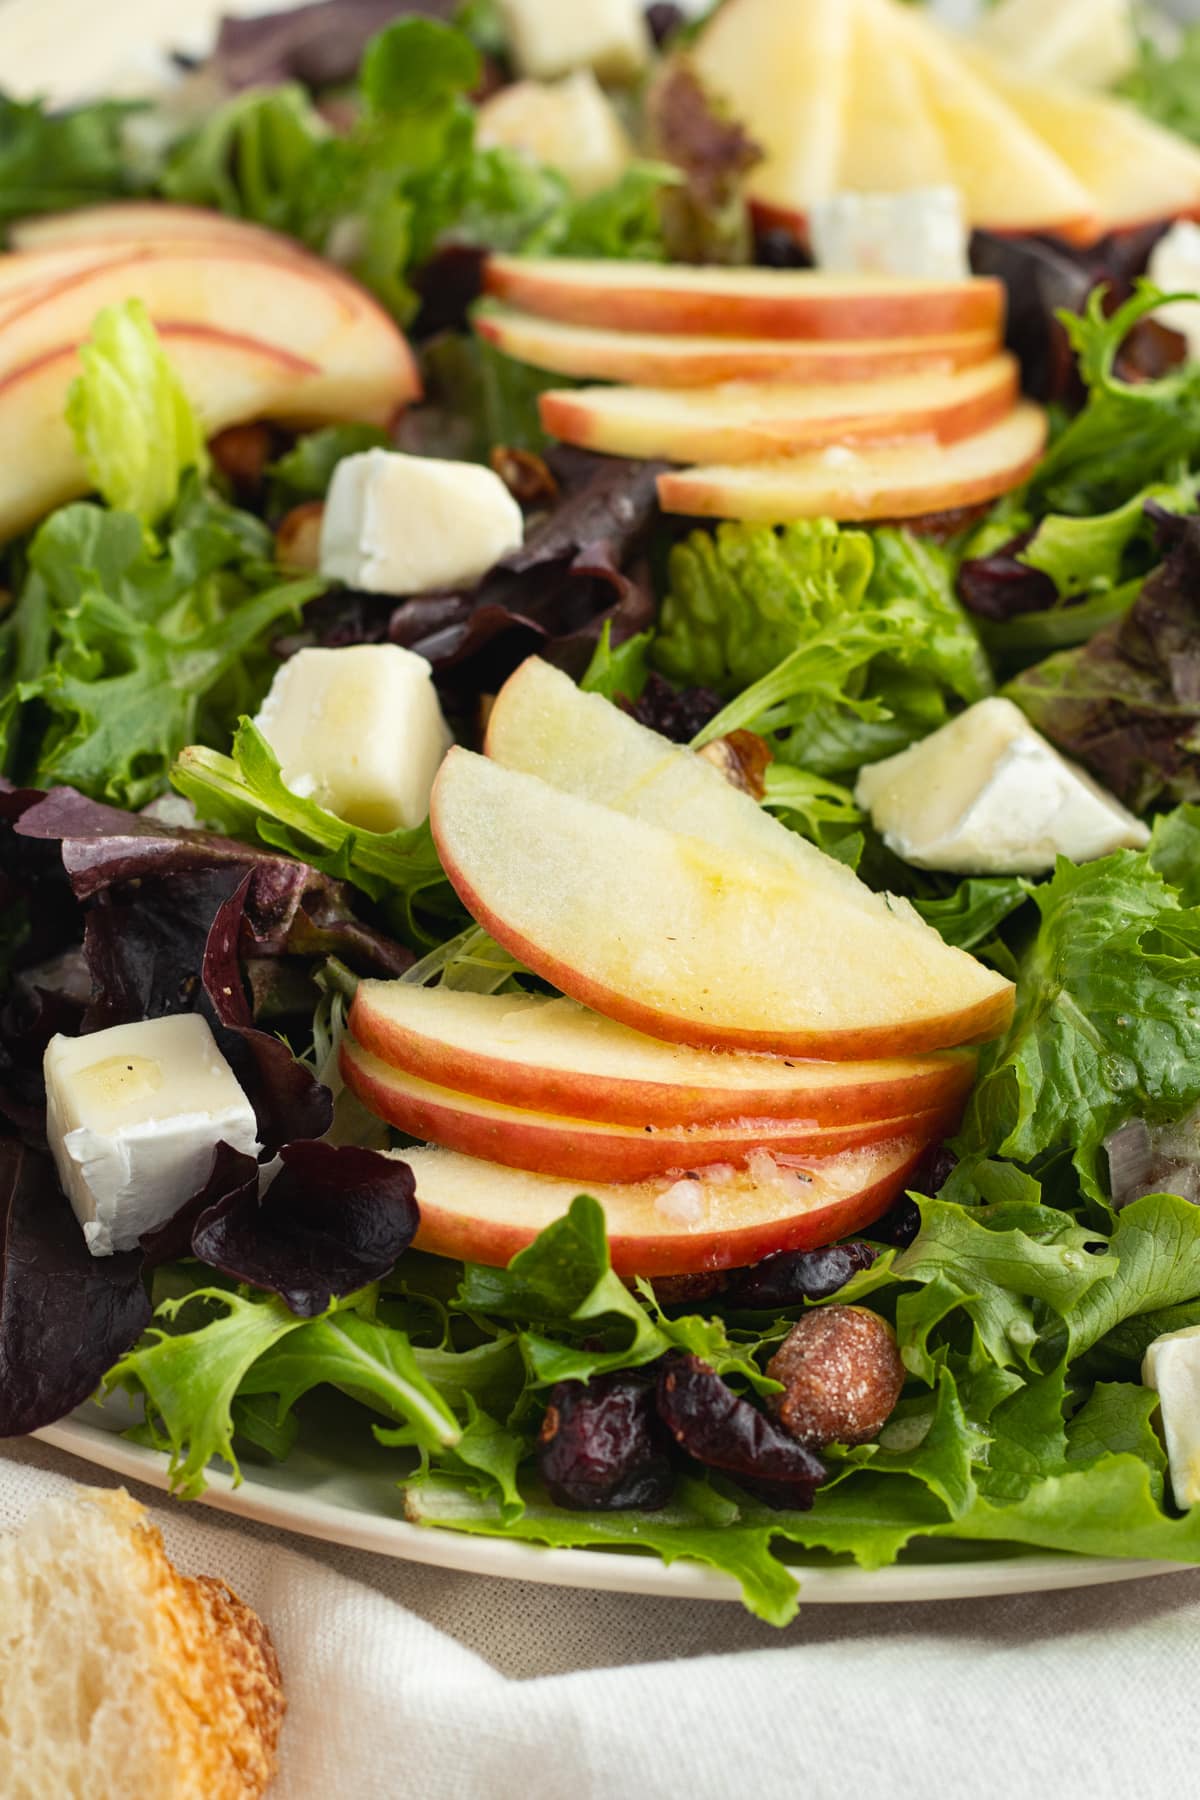 This is a close-up picture of the apple brie salad.